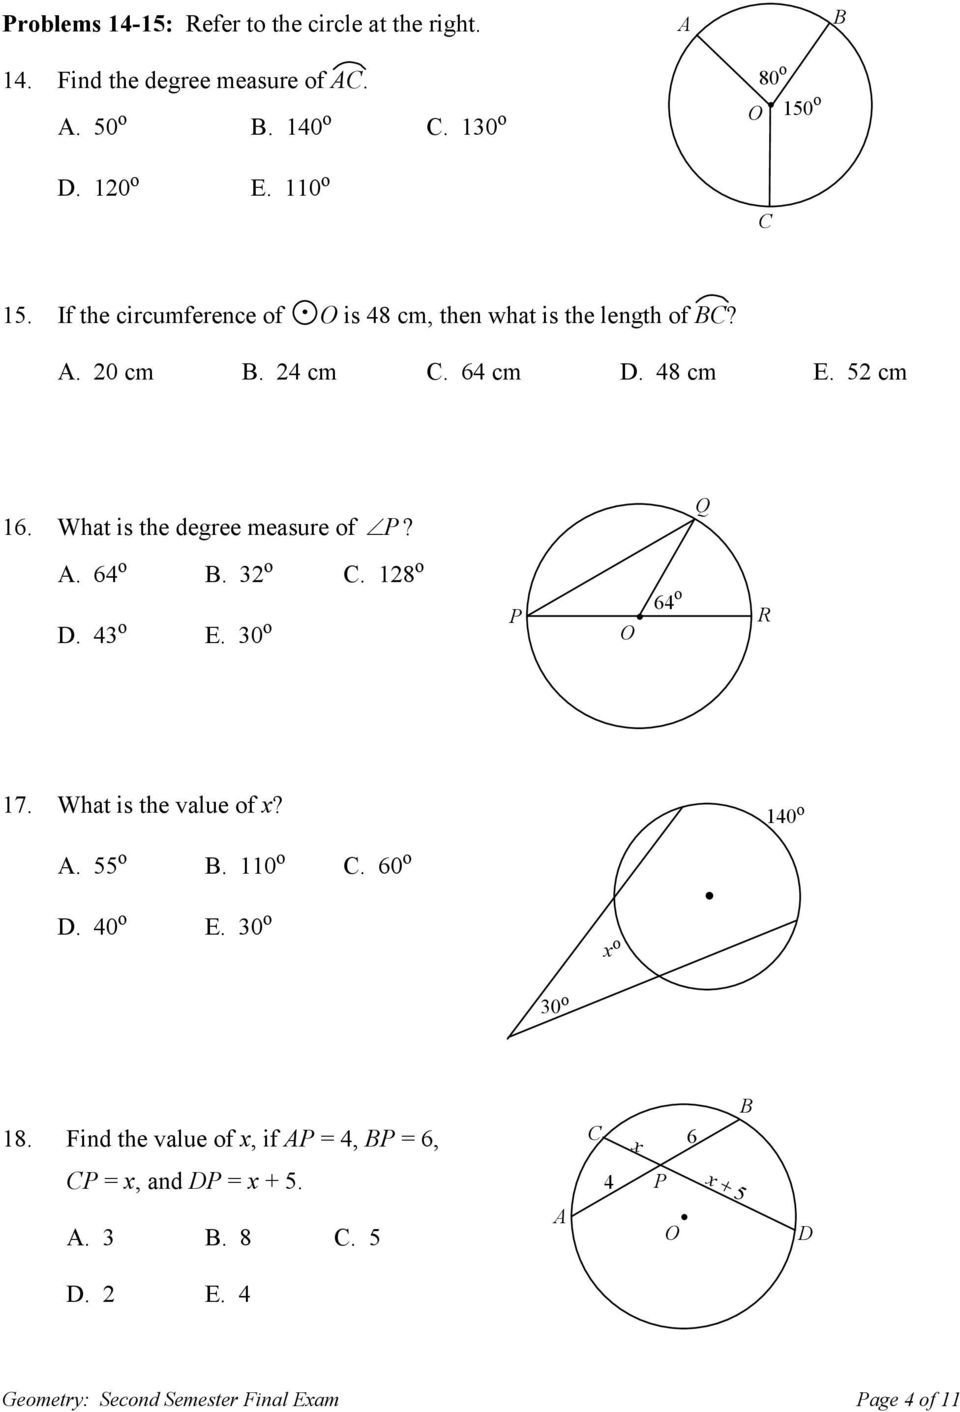 Geometry Cp 67 Dilations Worksheet Answers  Briefencounters In Geometry Cp 6 7 Dilations Worksheet Answers